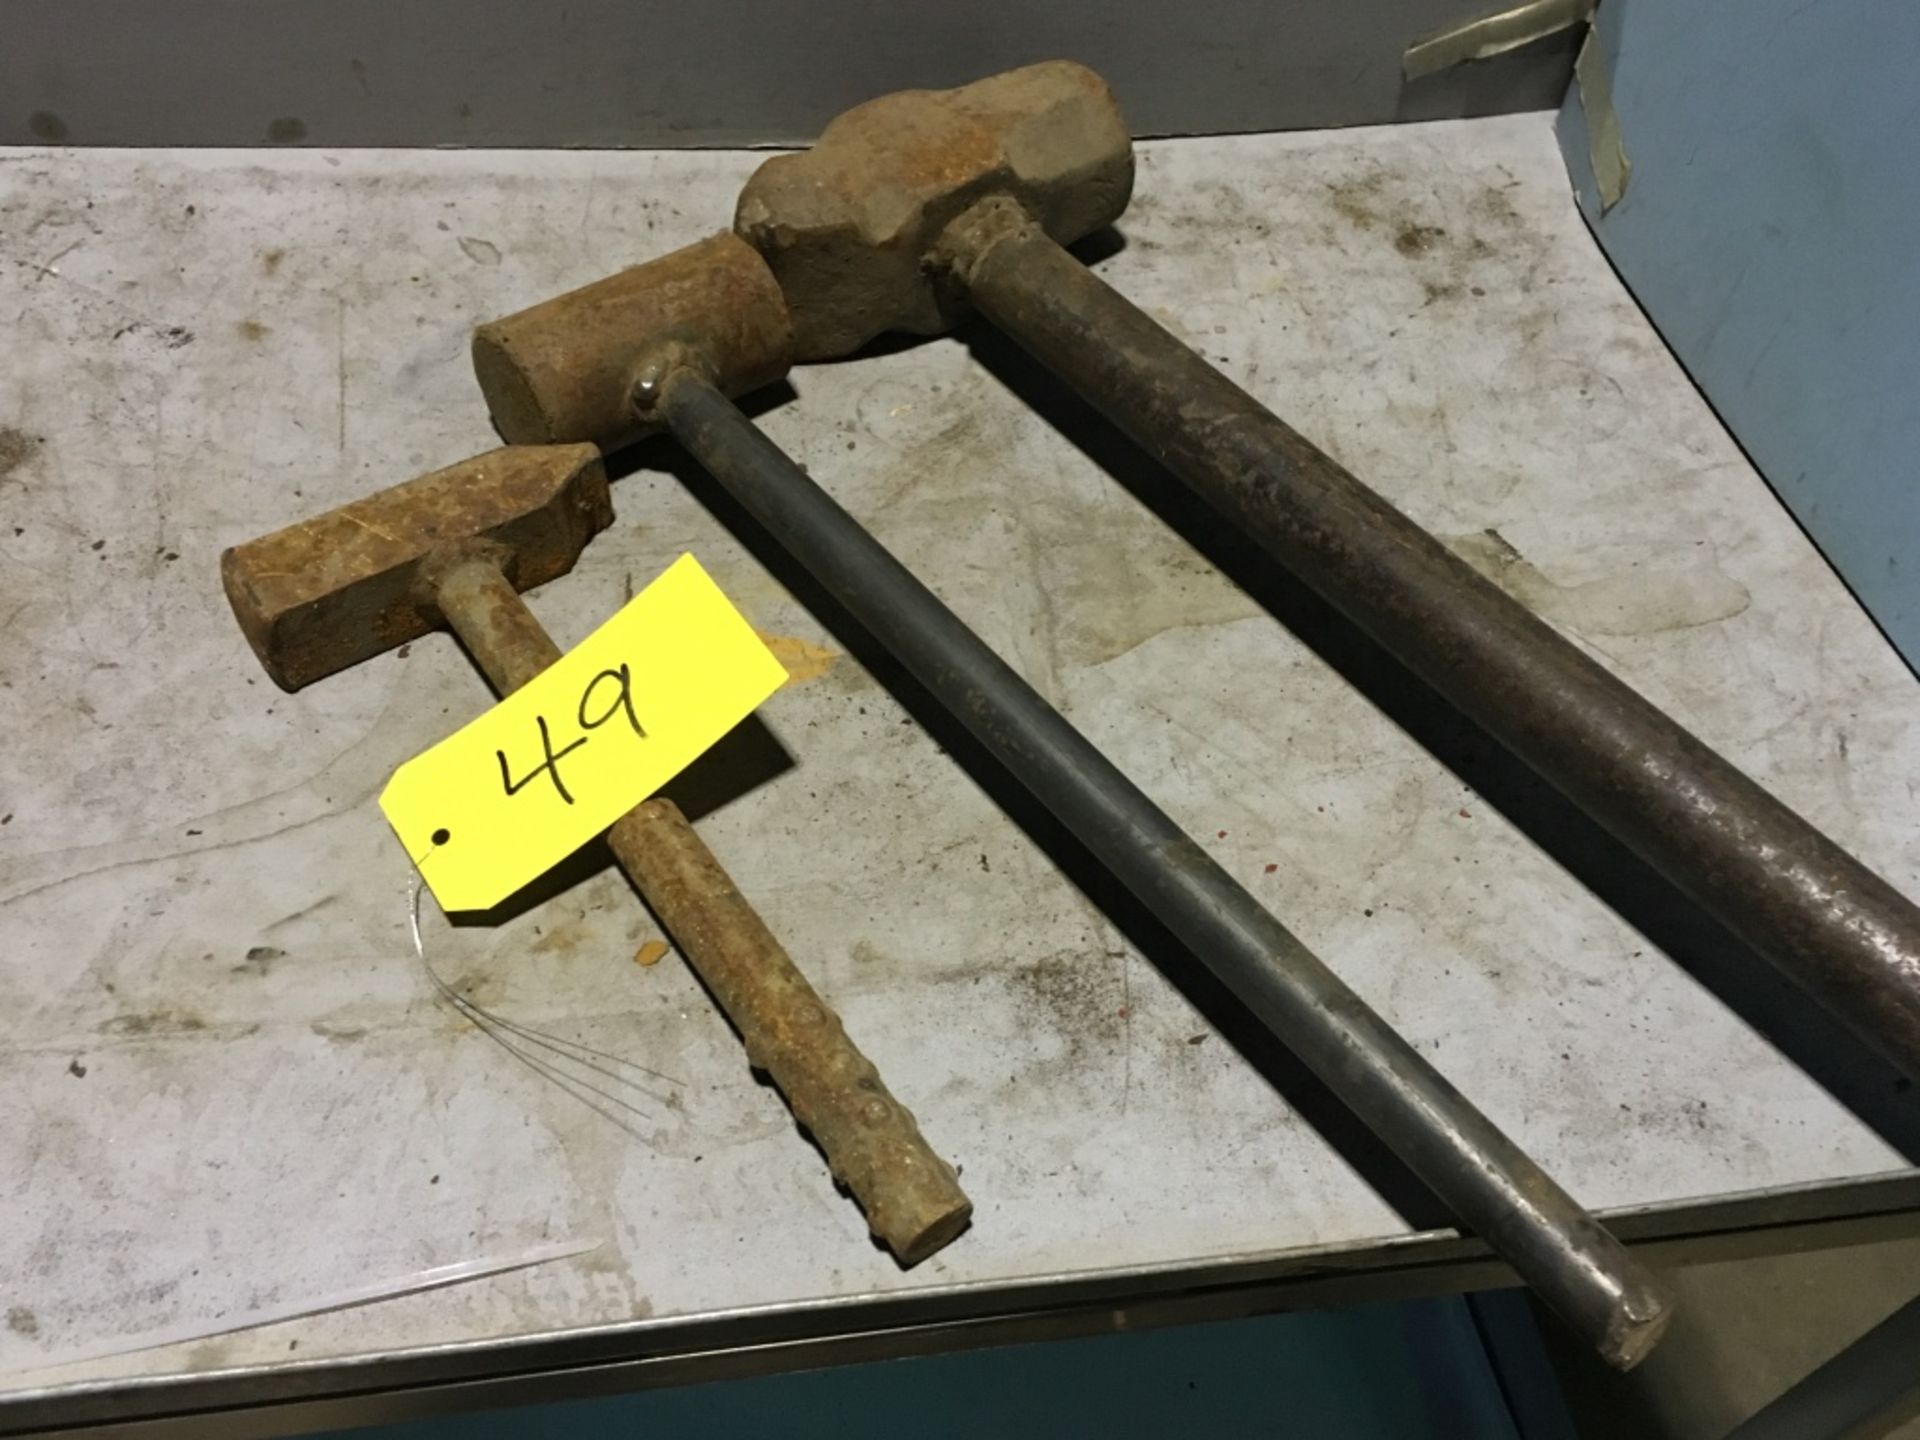 Approximately (3) steel handle hammers.